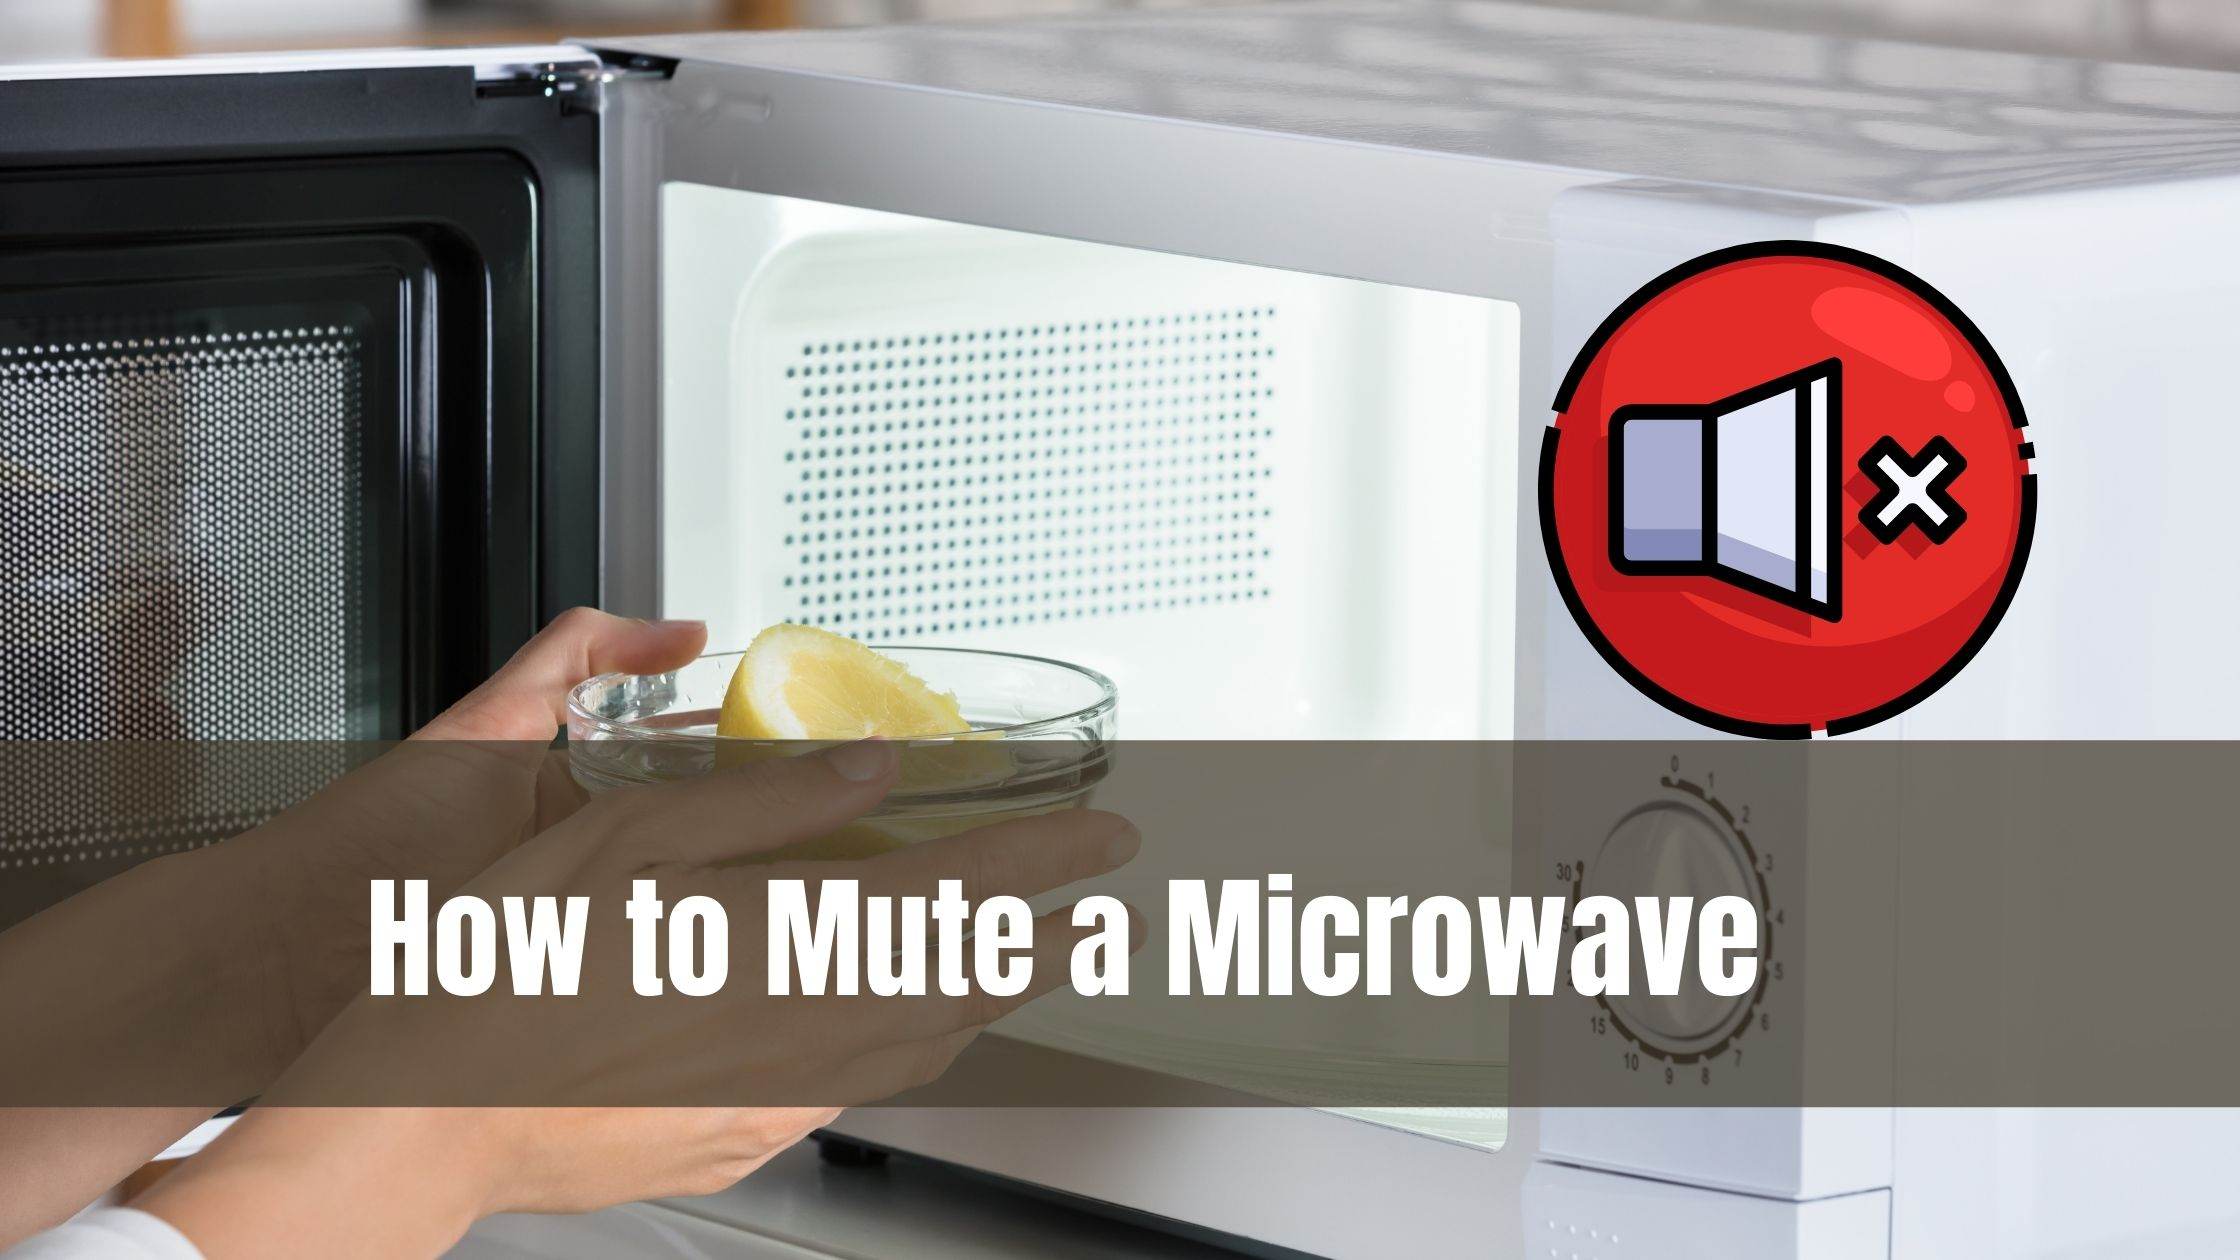 How to Mute a Microwave